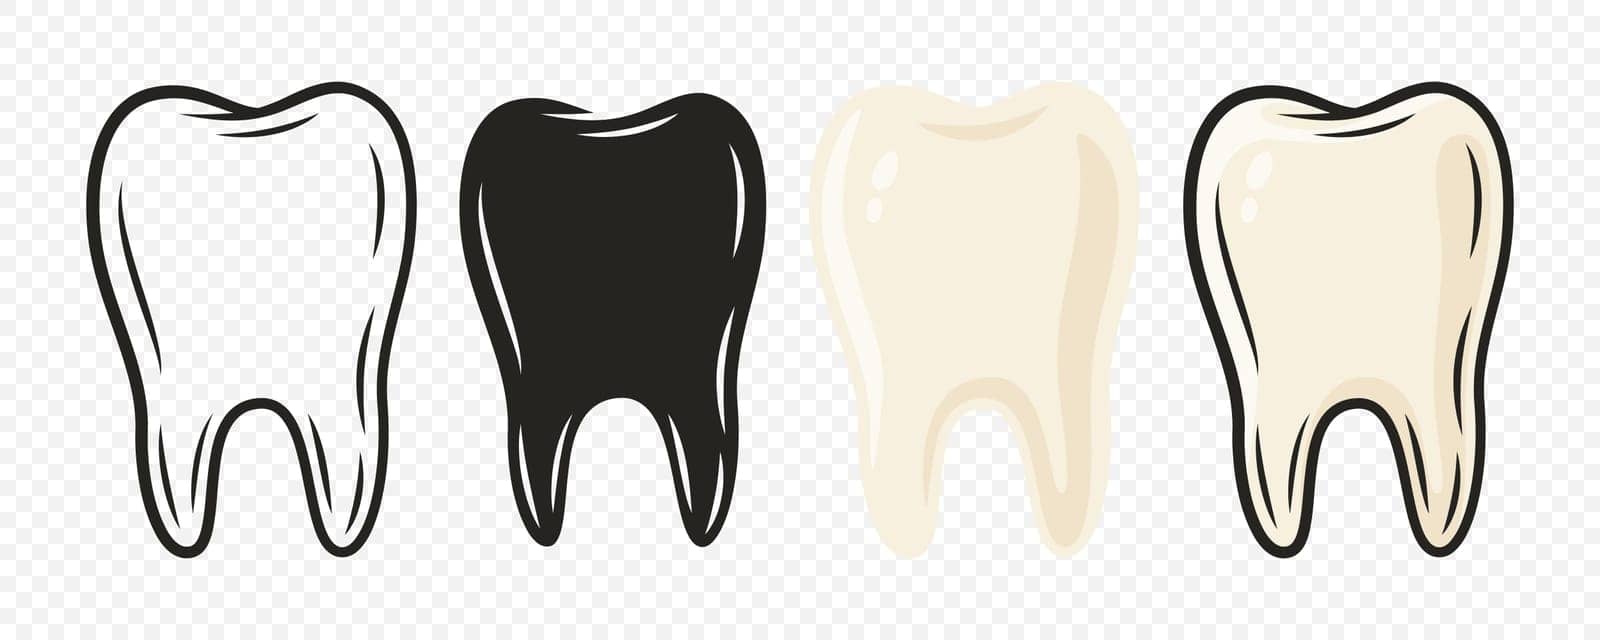 Vector Cartoon Tooth. Design Template for Promoting Dental Care and Toothpaste. Healthy Oral Hygiene Concept. Flat Vector Tooth. Front View.